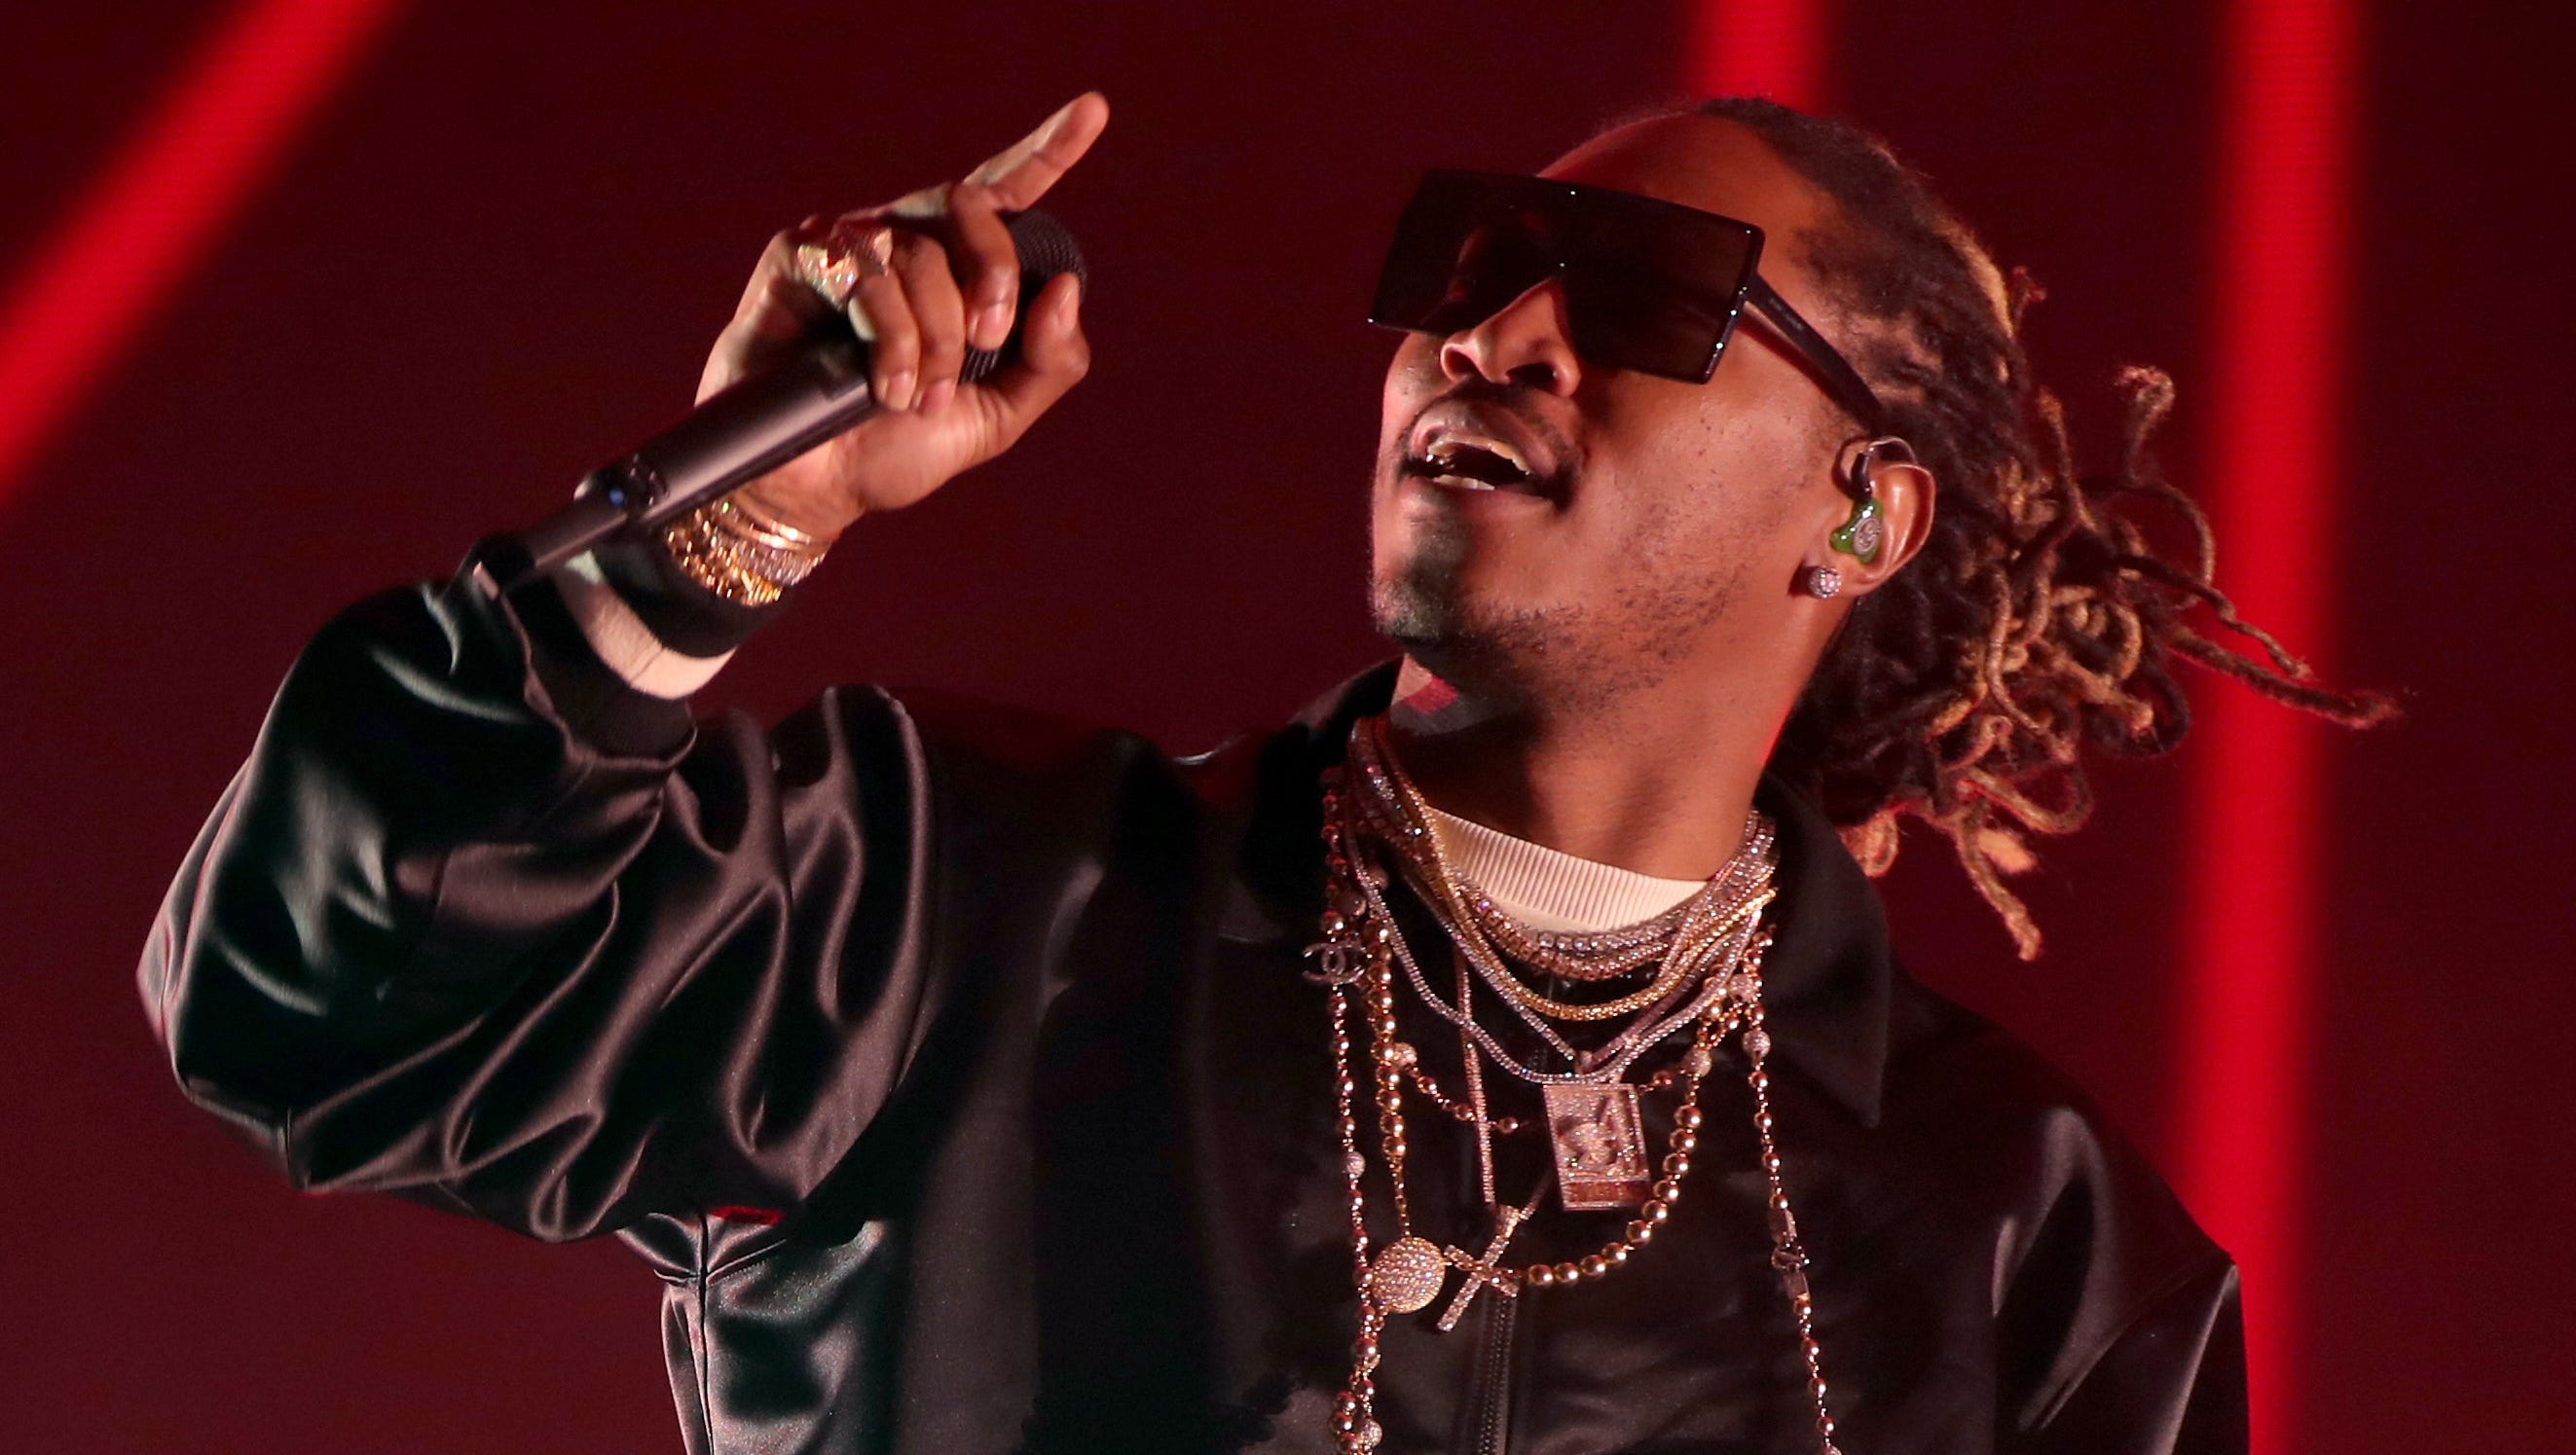 Future performs on stage at Coachella in 2017.